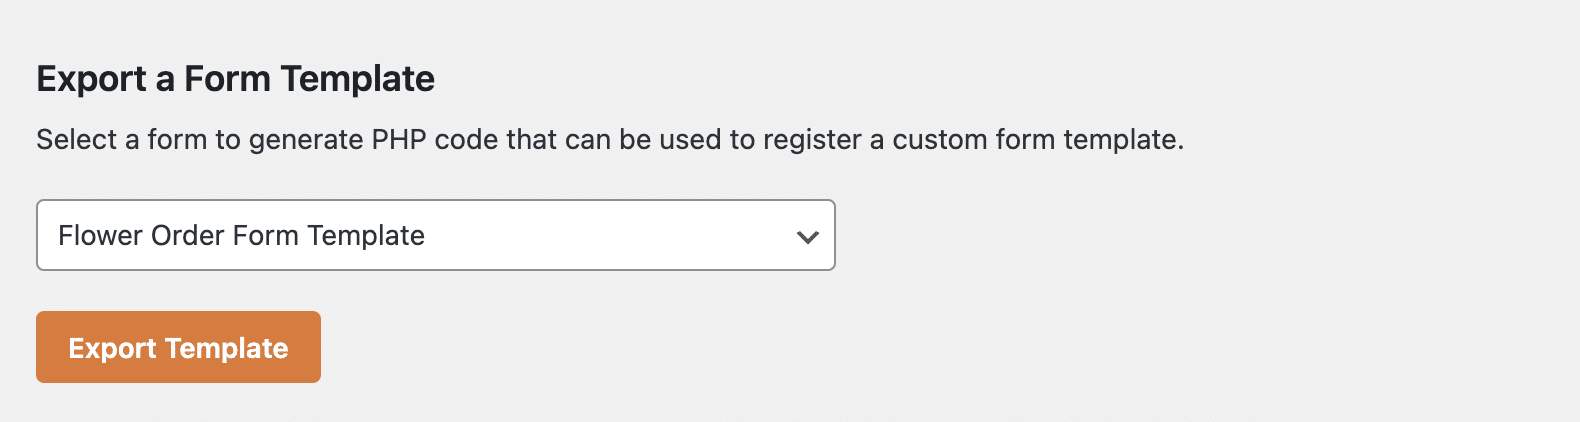 Exporting a form template